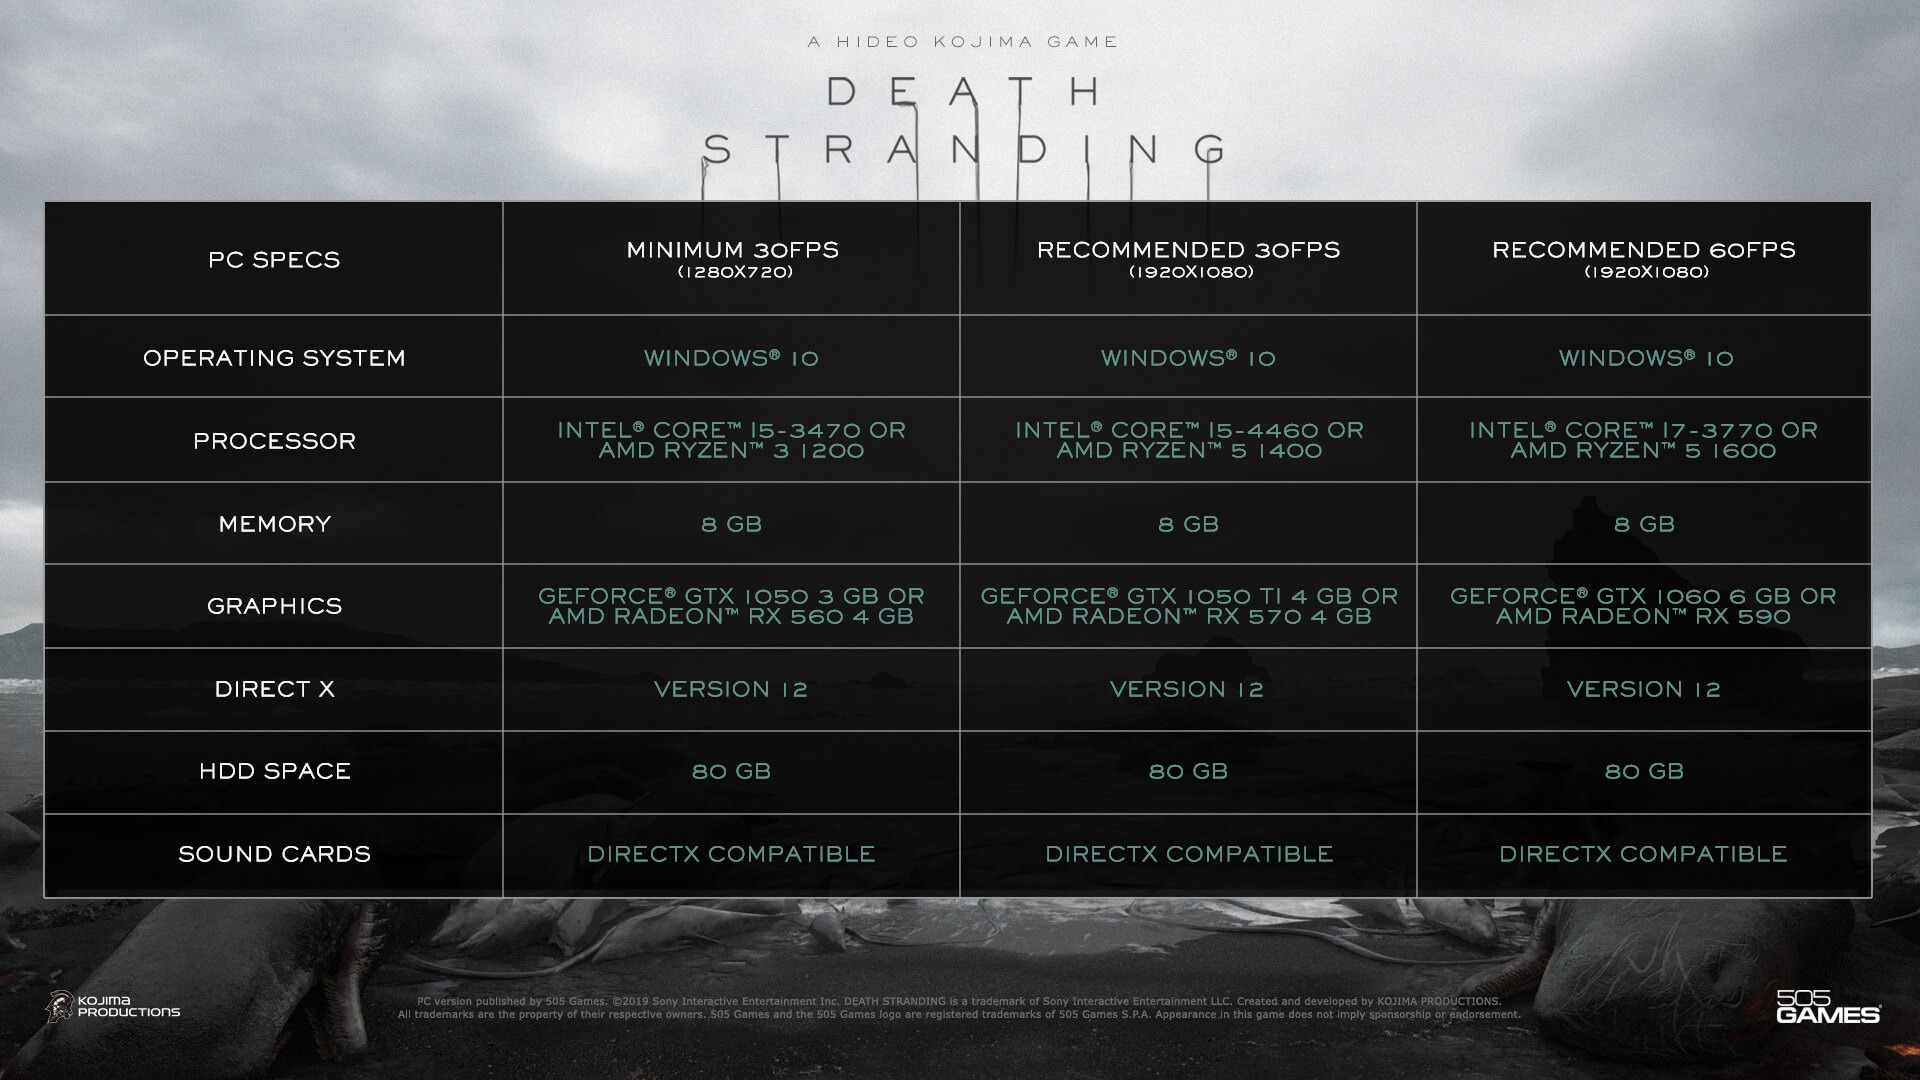 Death Stranding is currently free to keep from the Epic Games